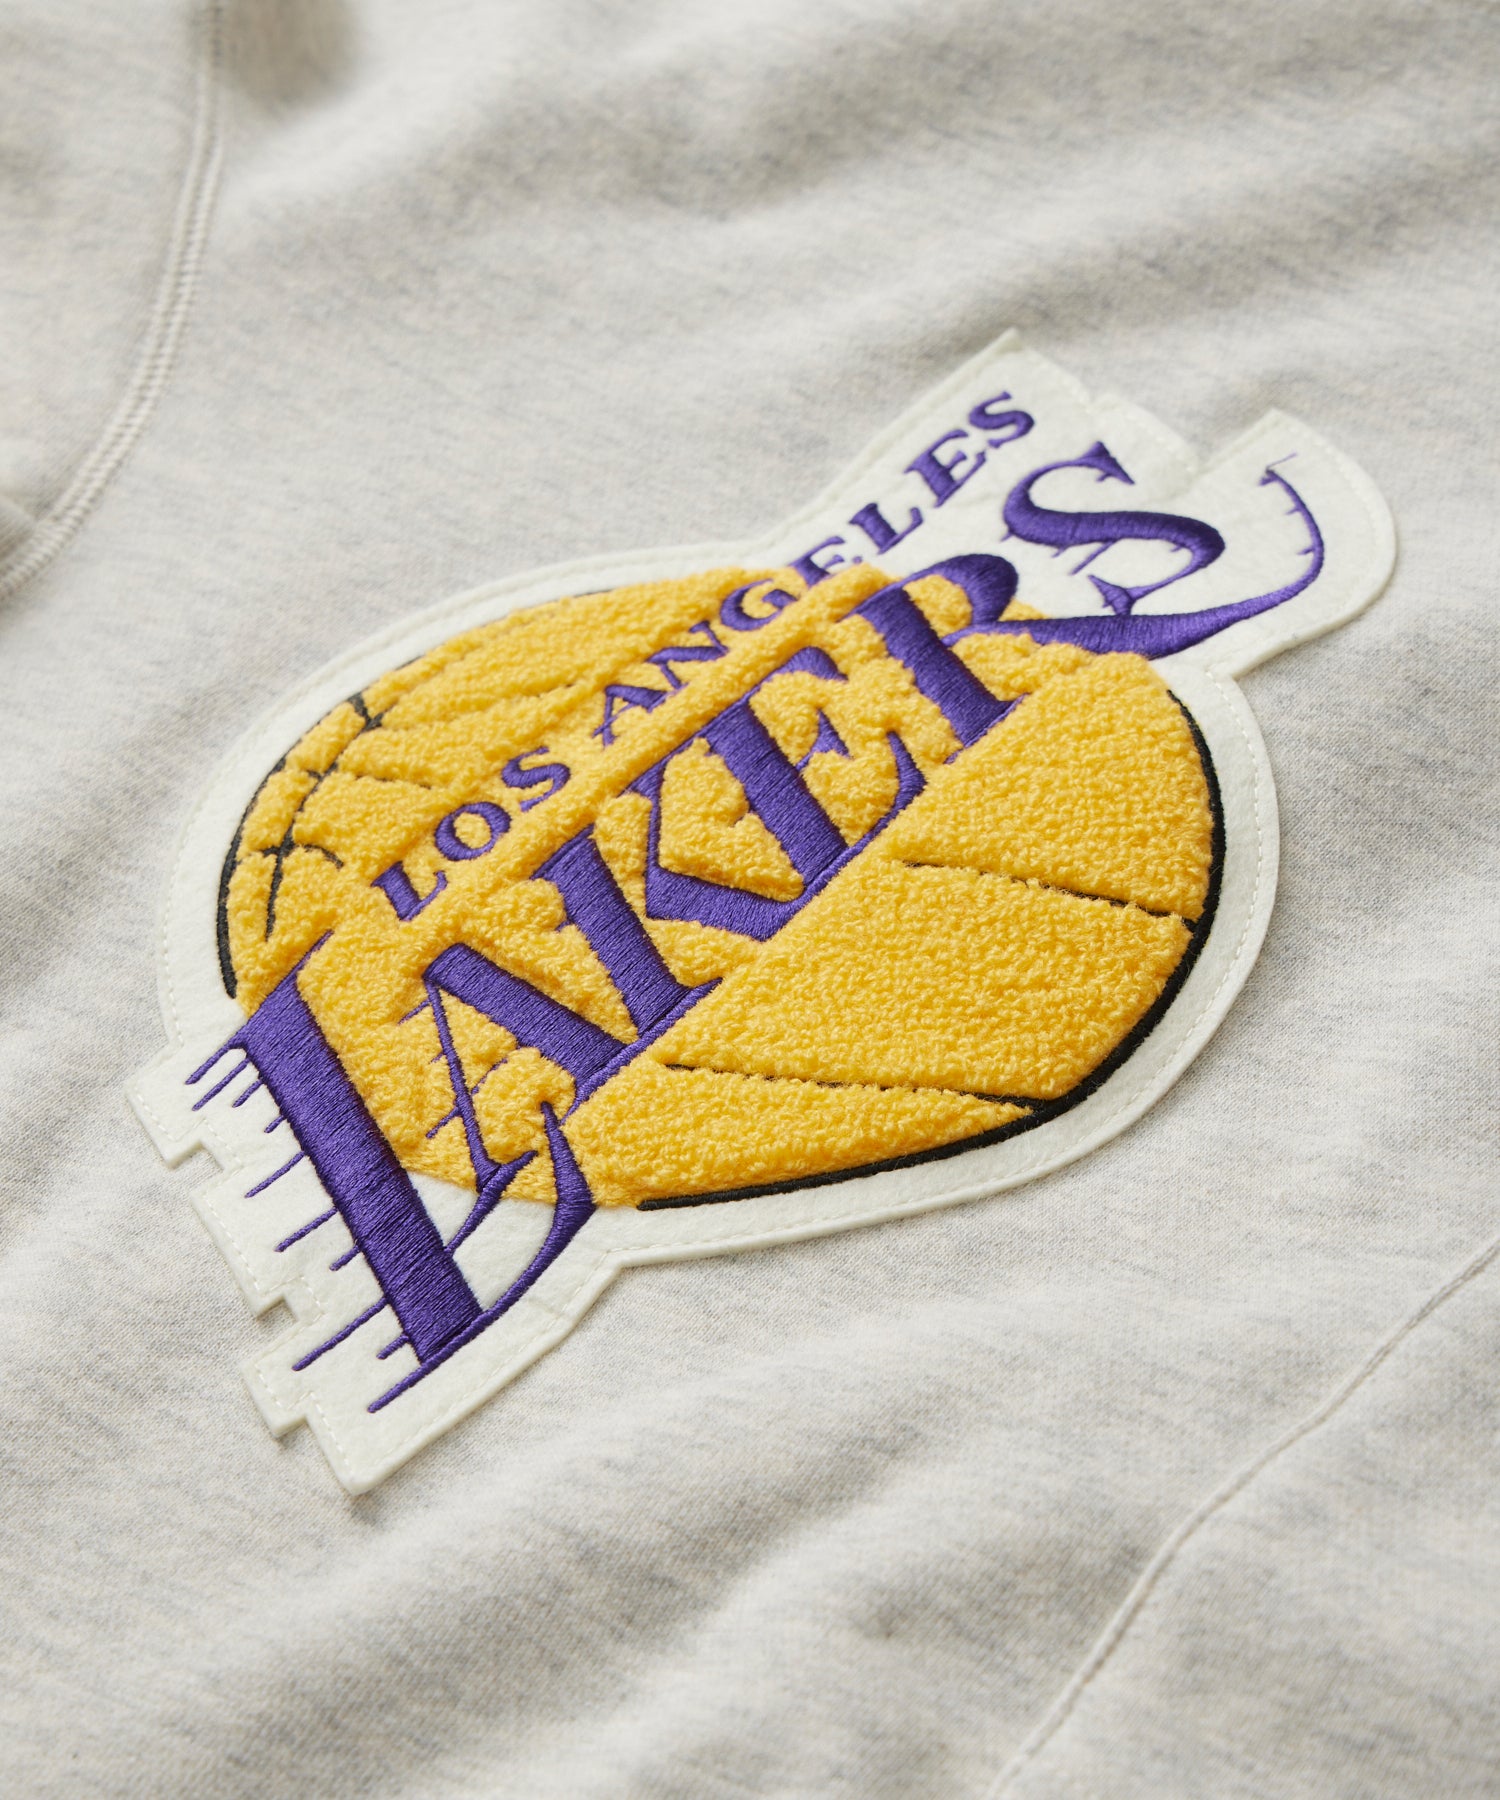 Todd Snyder x NBA Lakers French Terry Hoodie